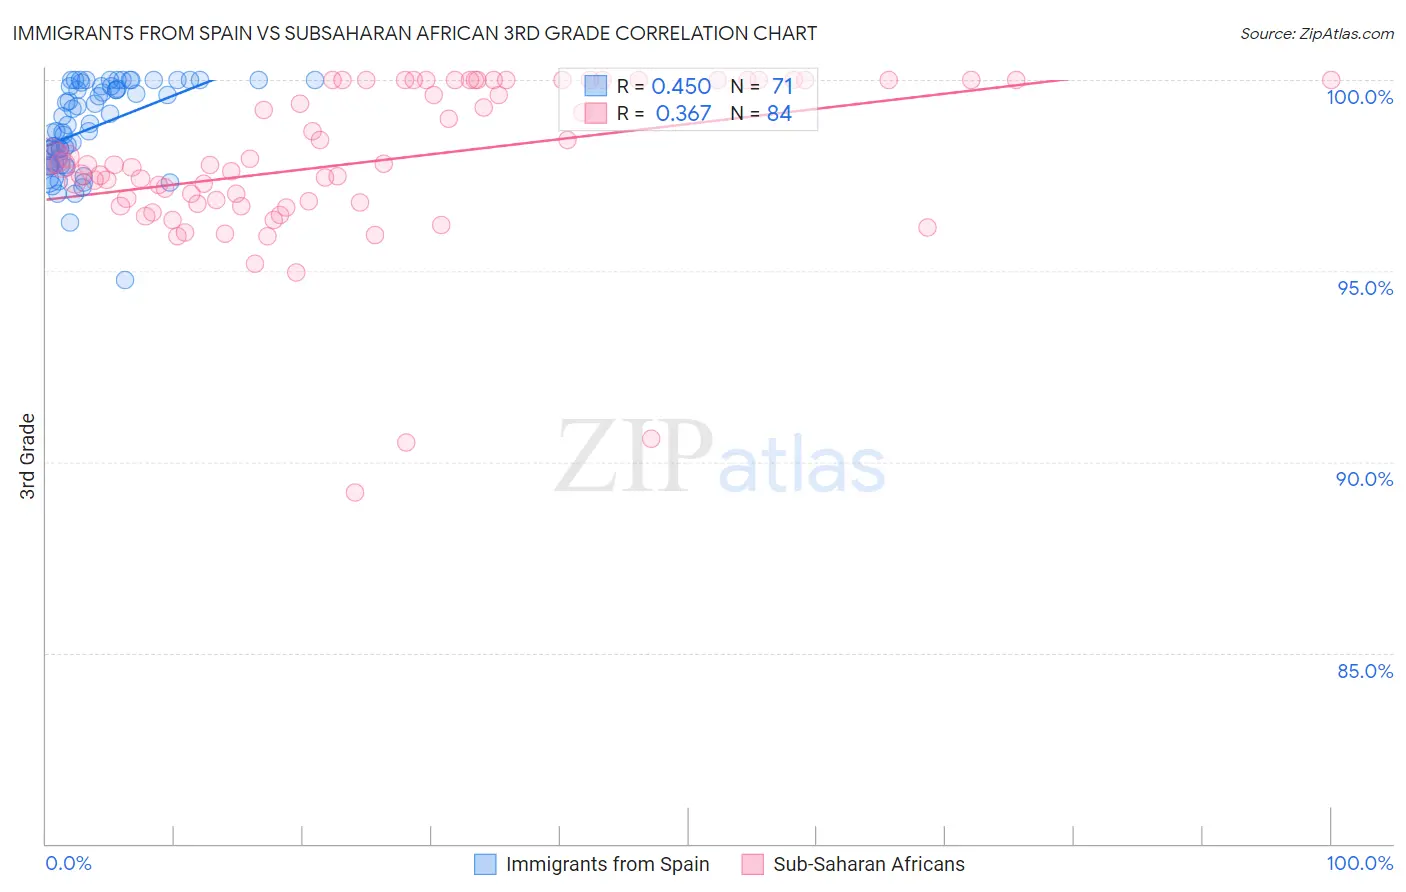 Immigrants from Spain vs Subsaharan African 3rd Grade